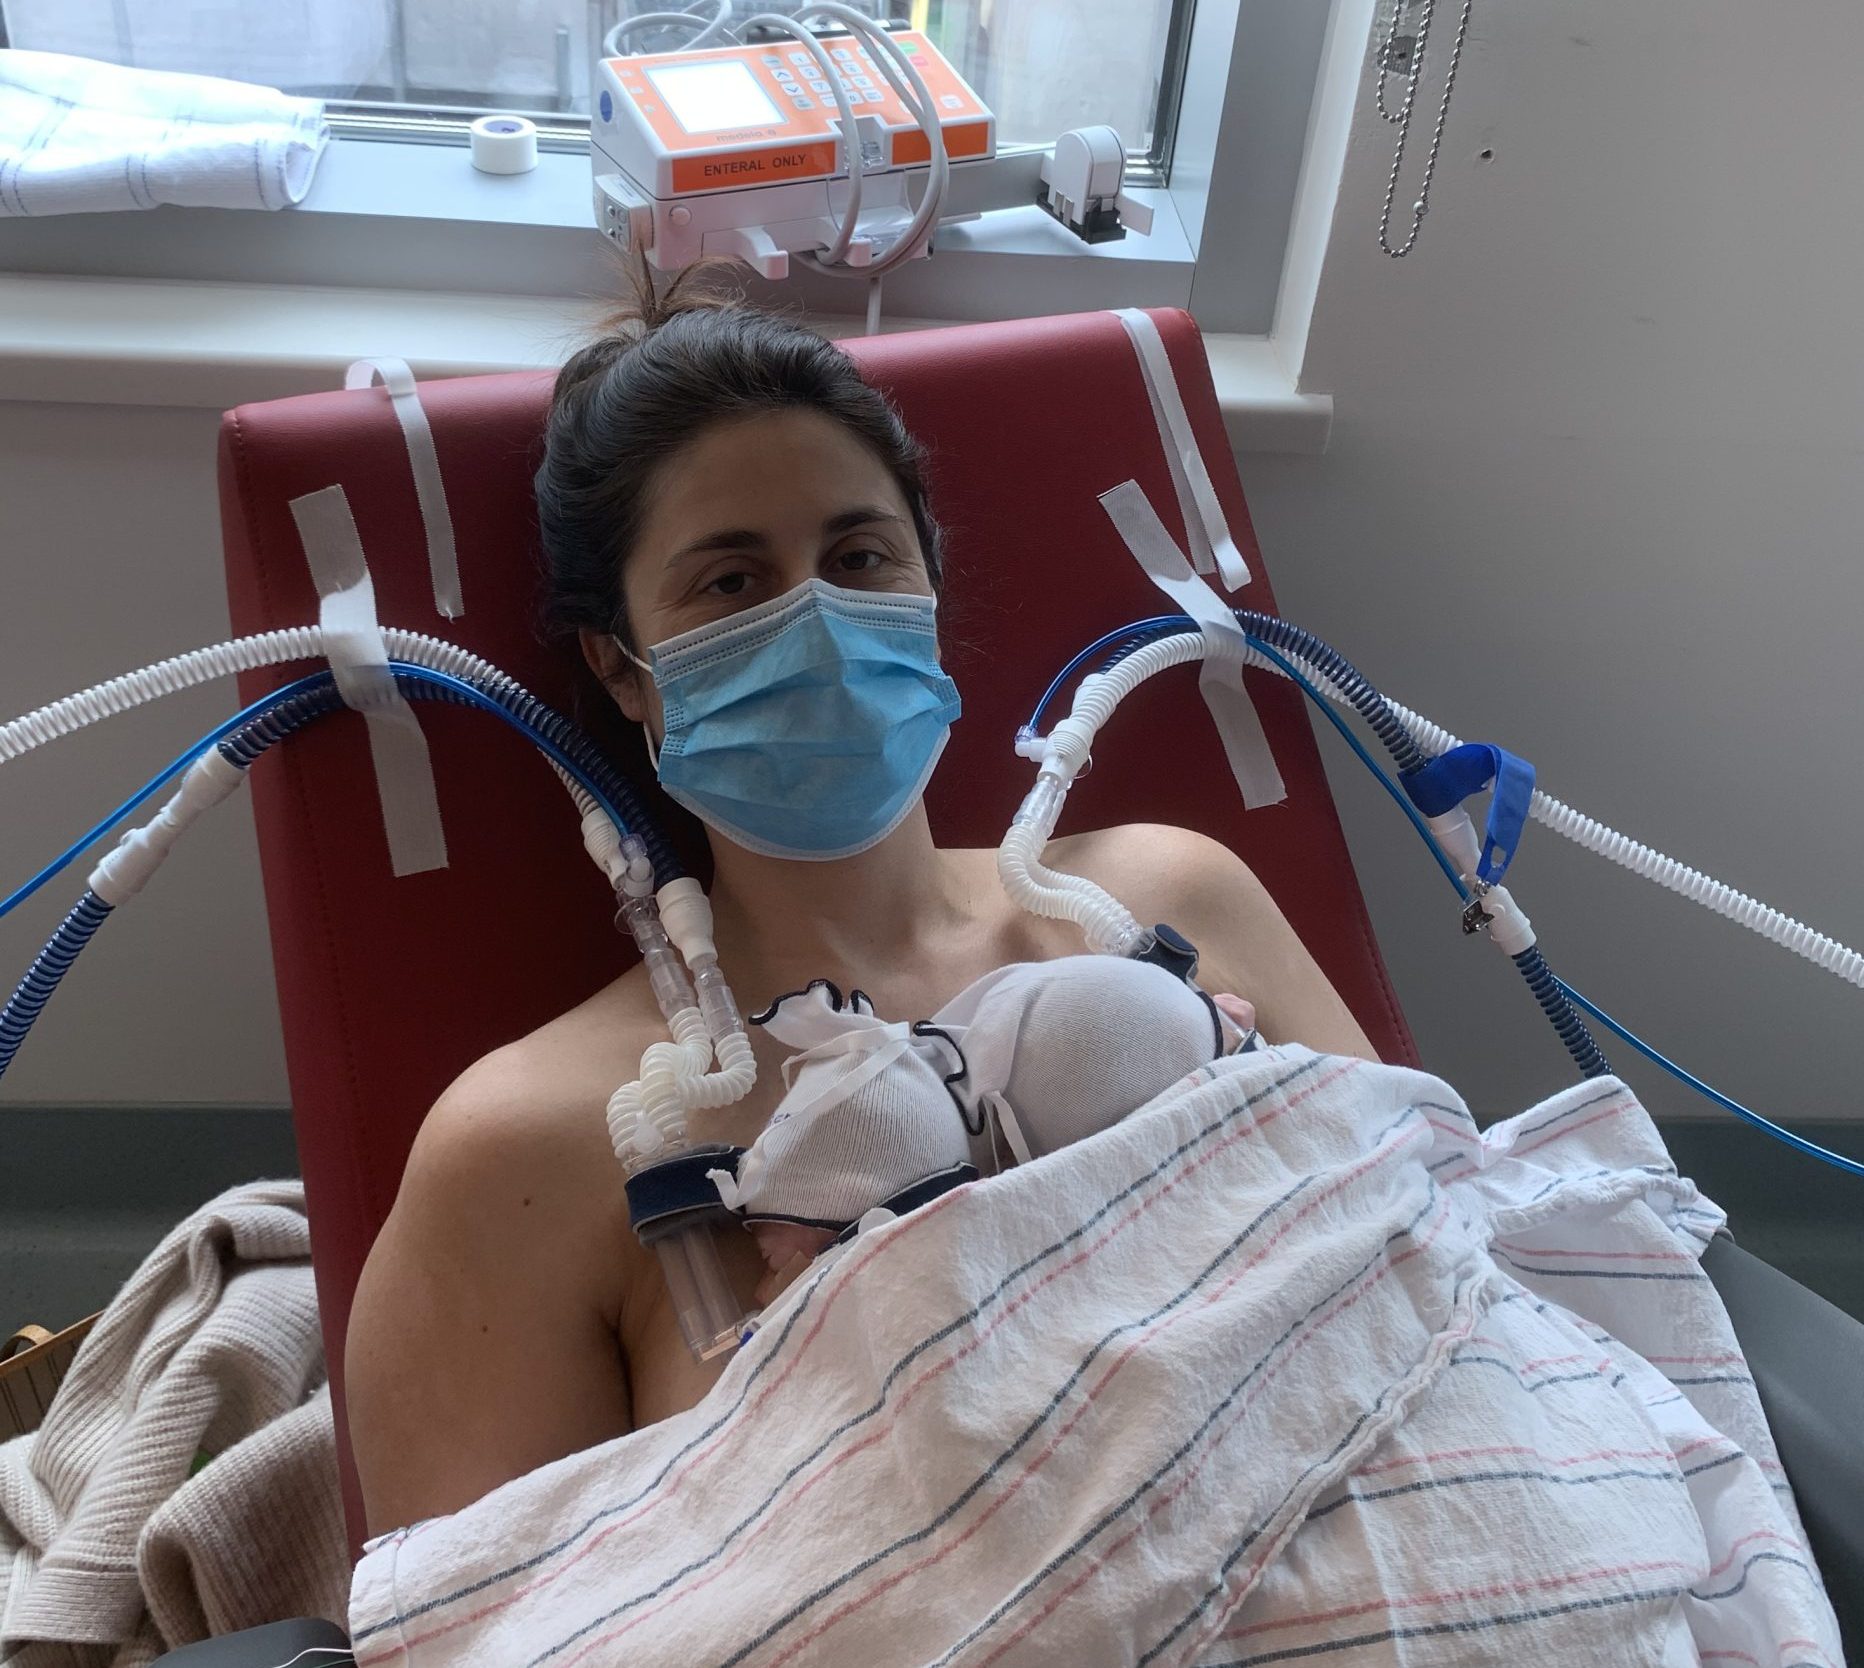 A mom wearing a face mask while holing premature babies in a chair connected to multiple medical devices.